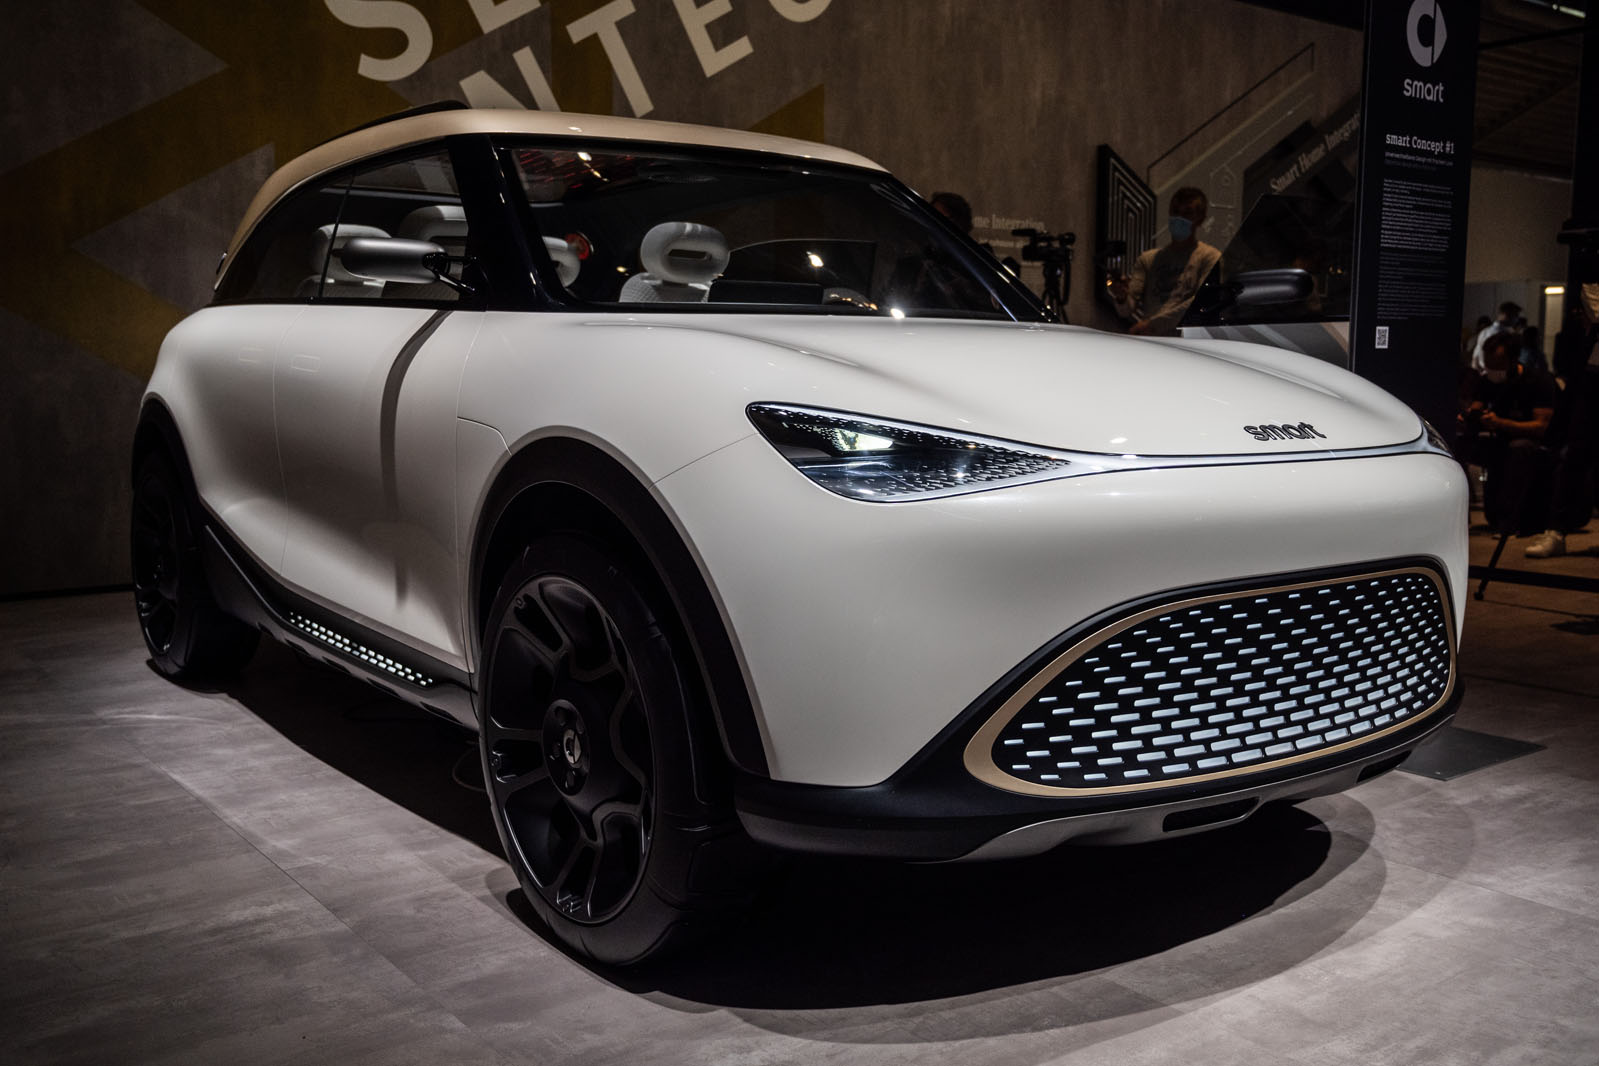 Smart #1 Debuts As A Cute Electric Crossover With 268 HP